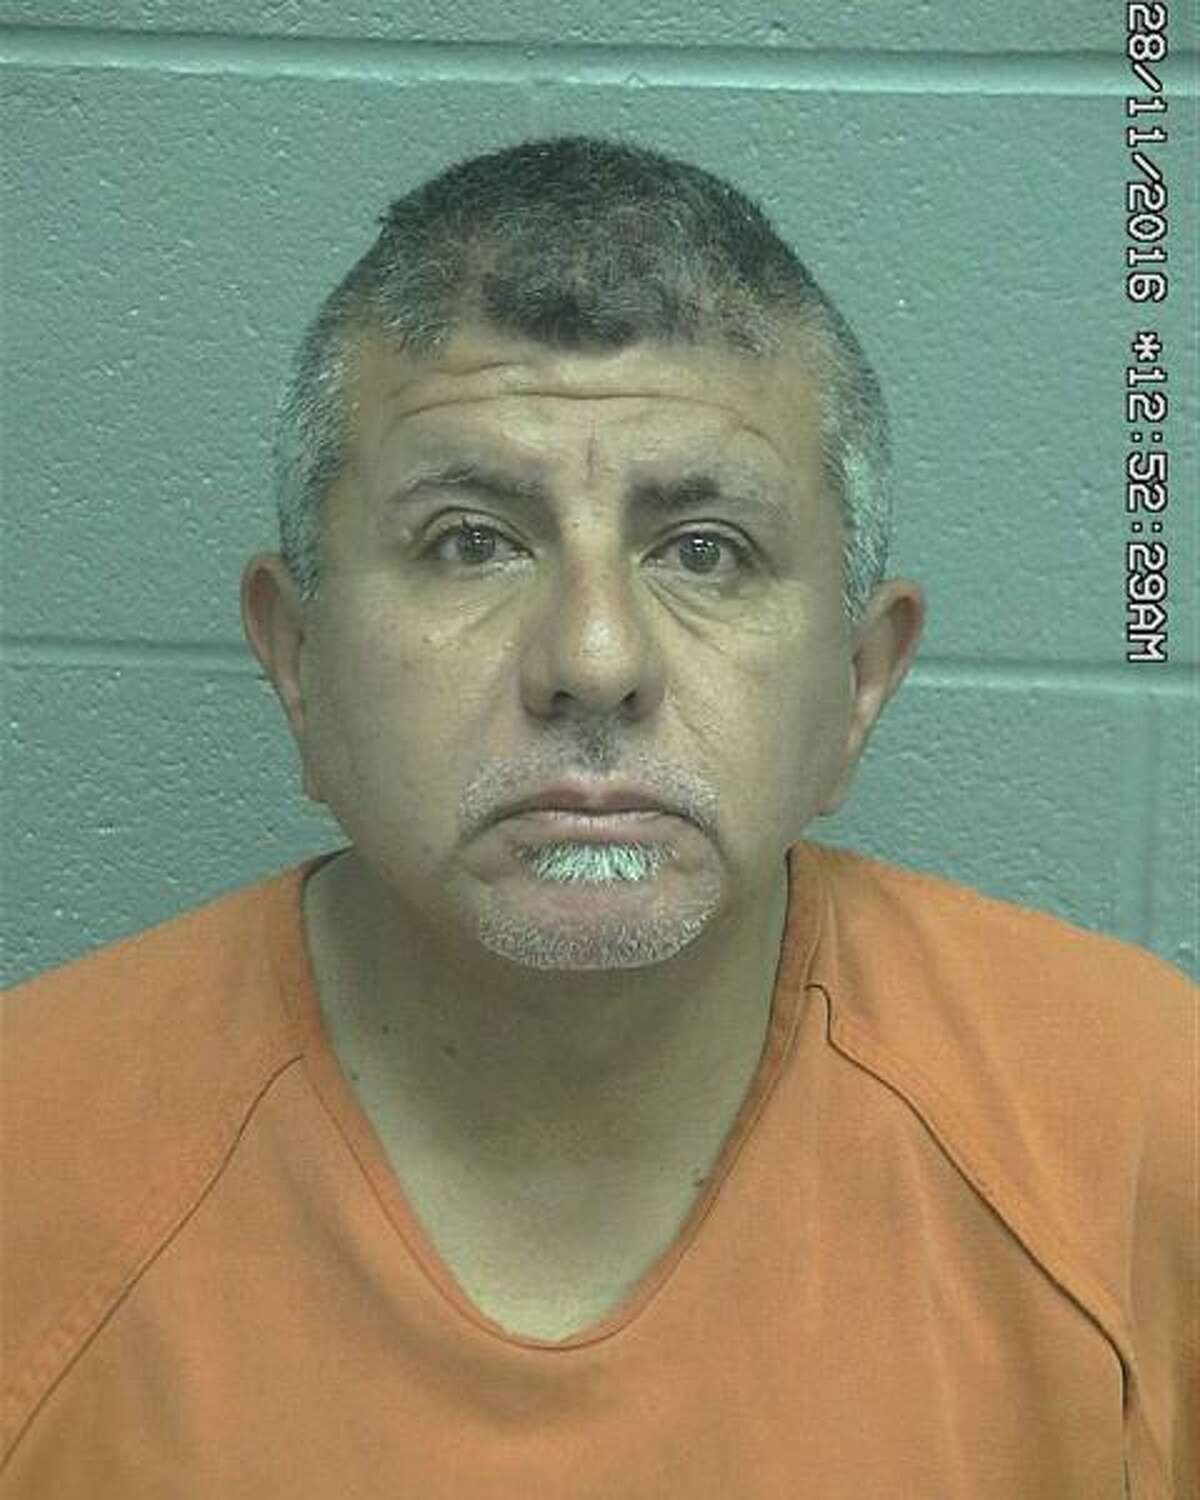 Adrian Gomez Martinez, 51, was arrested Nov. 30  after allegedly assaulting and stalking a woman, according to court documents. Martinez grabbed the woman by the throat and pushed her down, causing her to fall onto a table and break her ribs, according to the affidavit. He also repeatedly called a family member and left threatening notes at the woman’s residence, according to the affidavit.